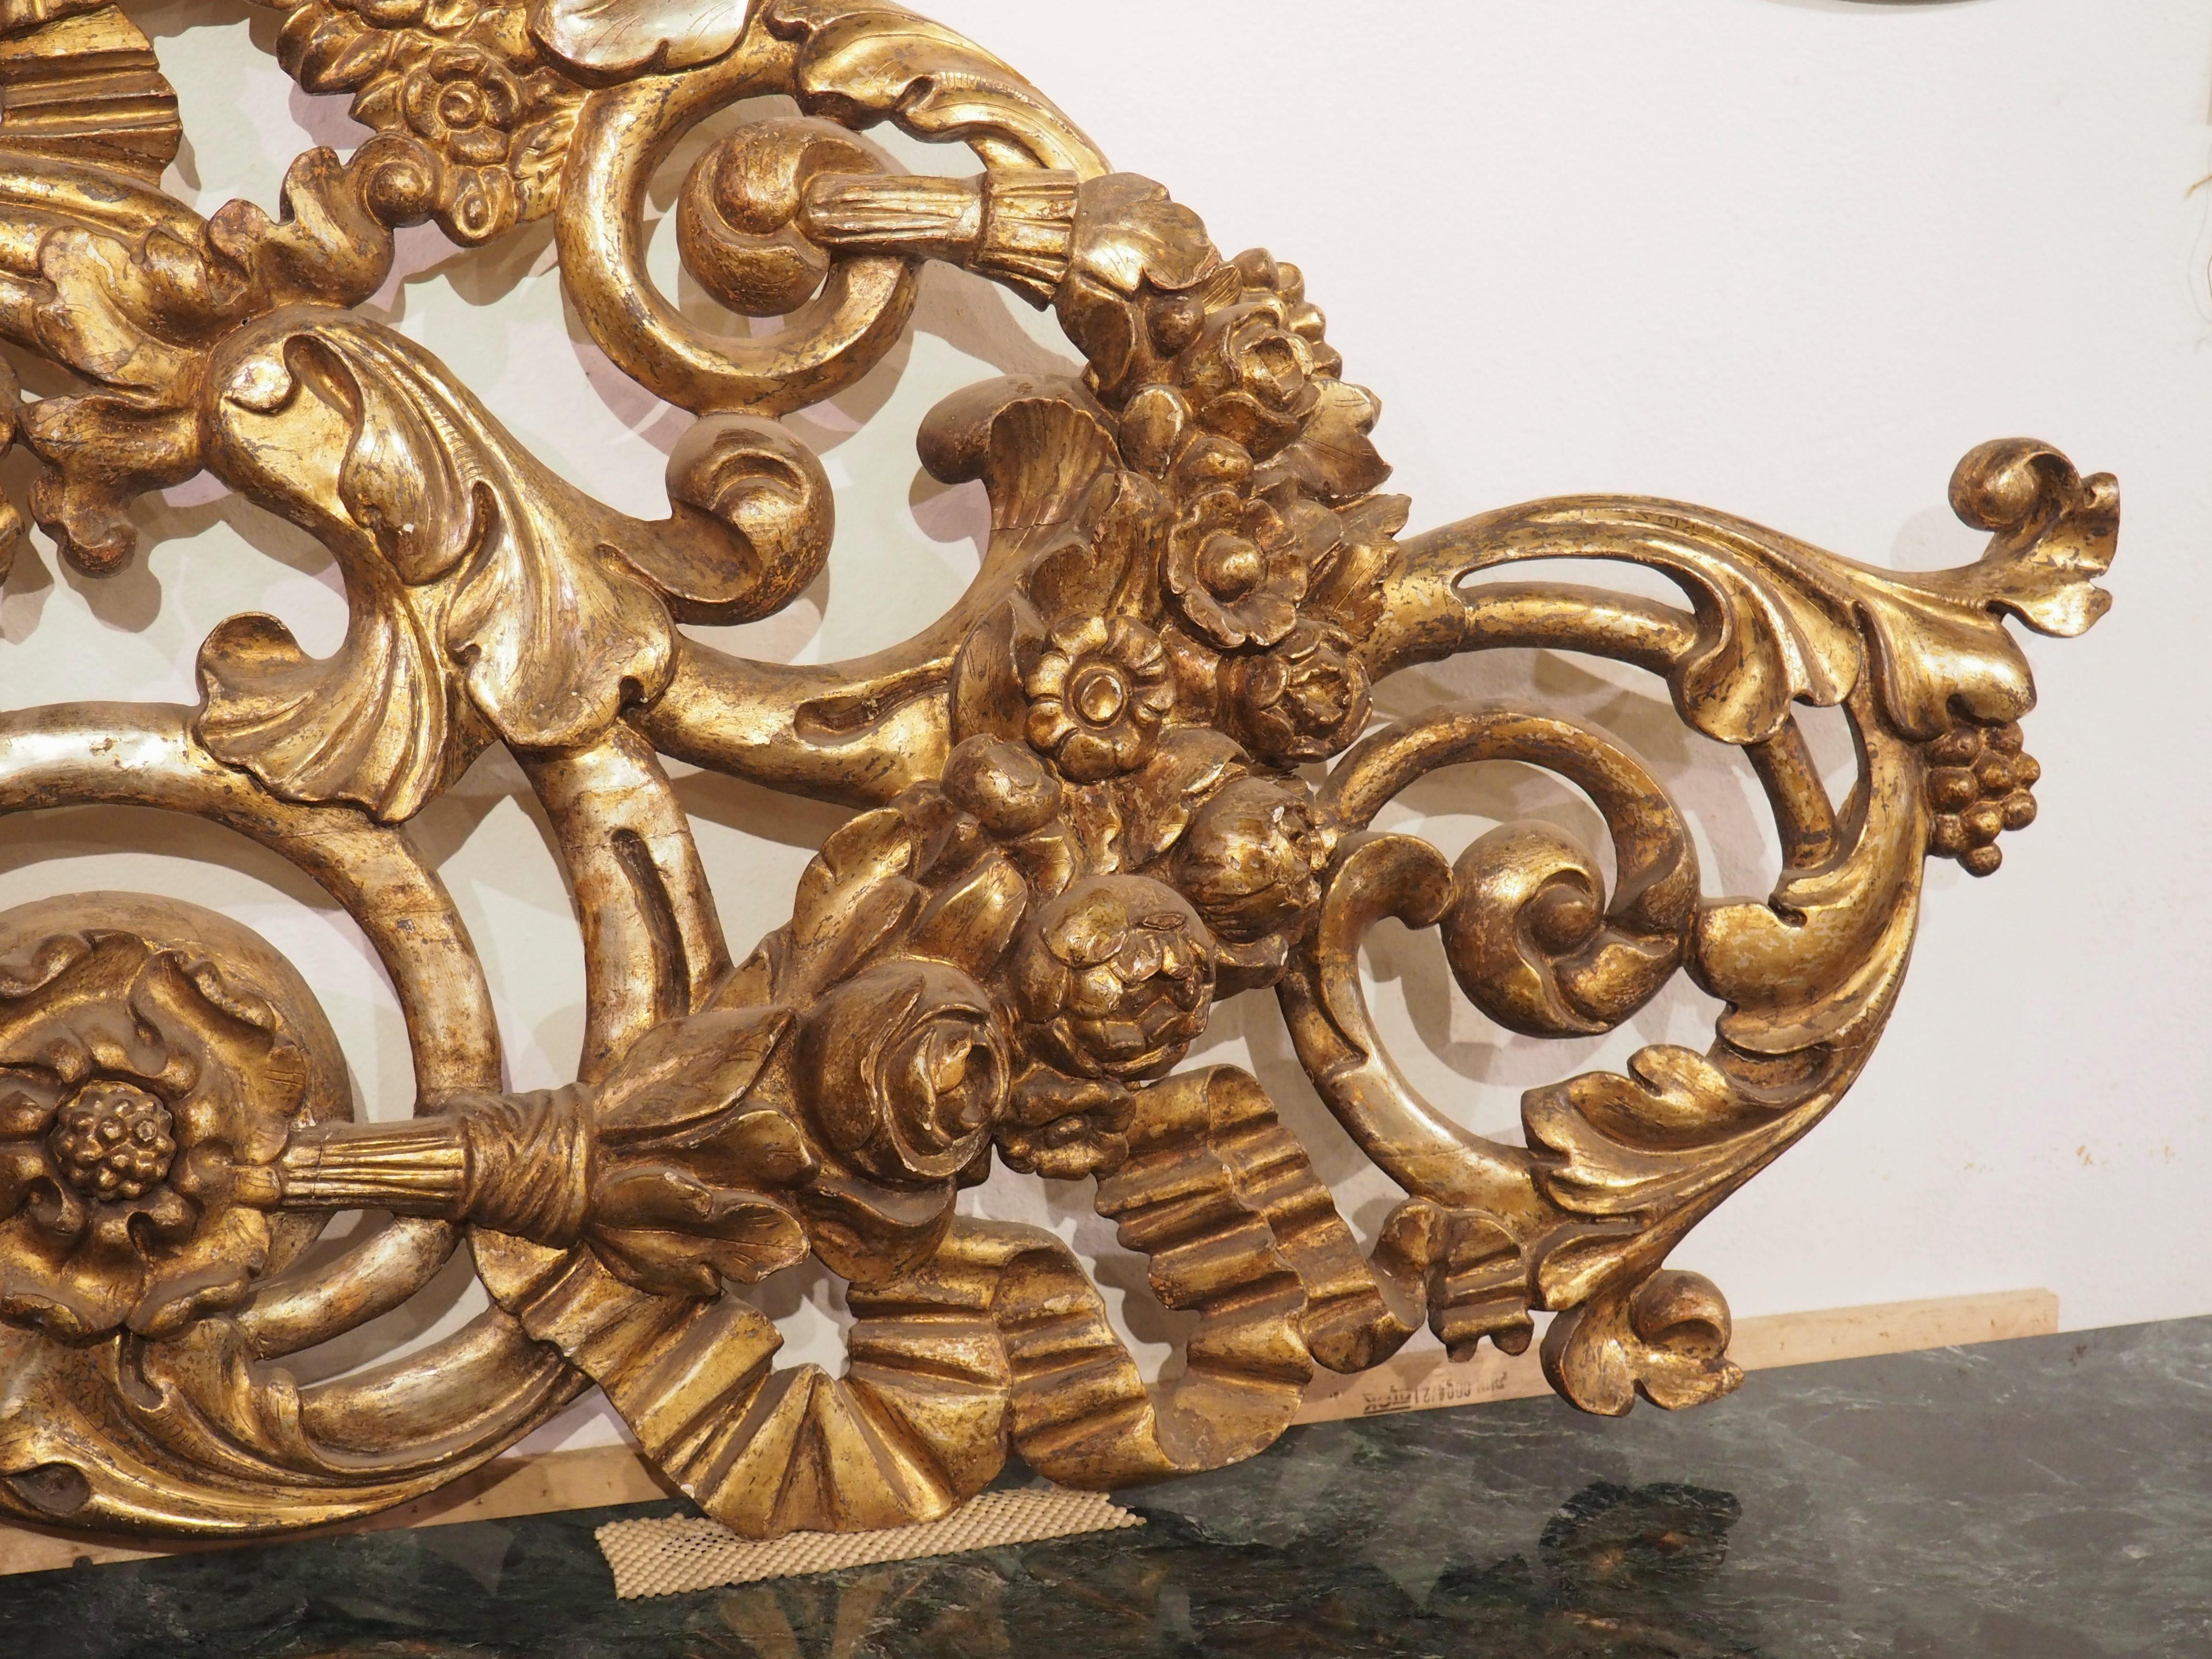 Mid-19th Century Large Circa 1850 Italian Giltwood Architectural Carving or Headboard 91.5 Inches For Sale